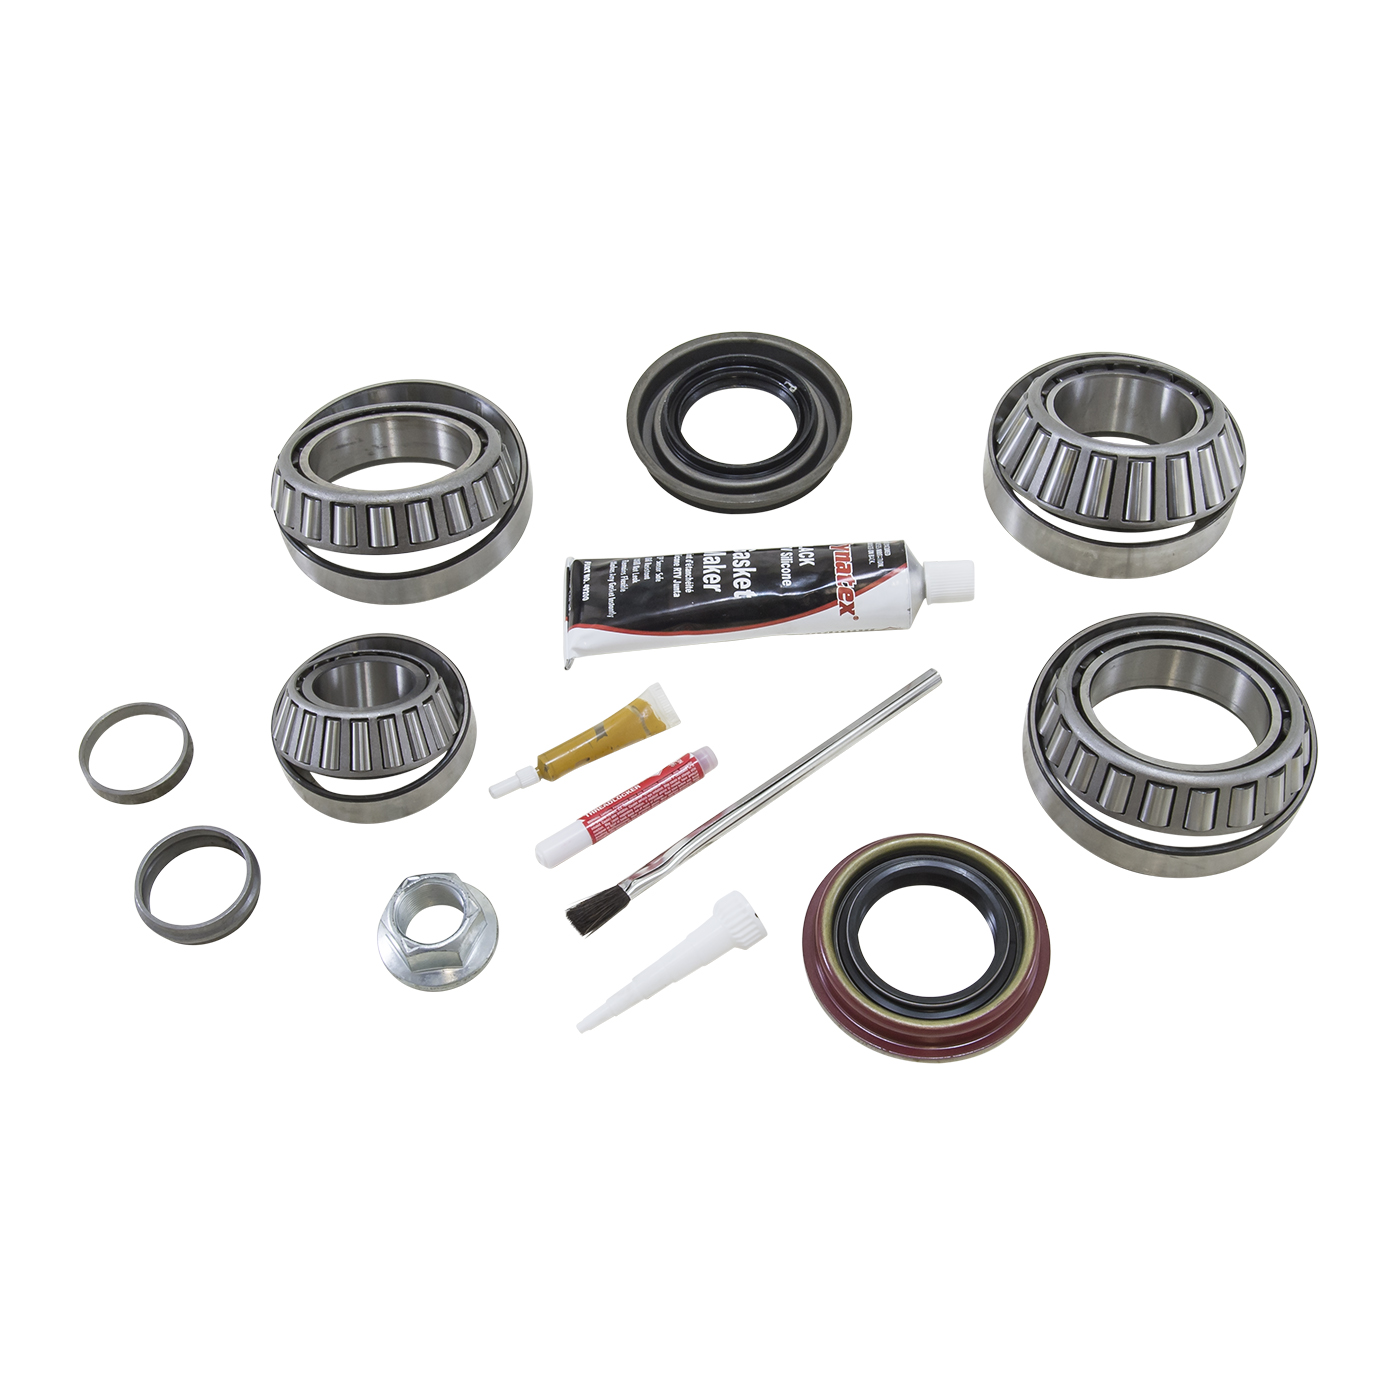 USA Standard Bearing kit for '11 & up Ford 9.75